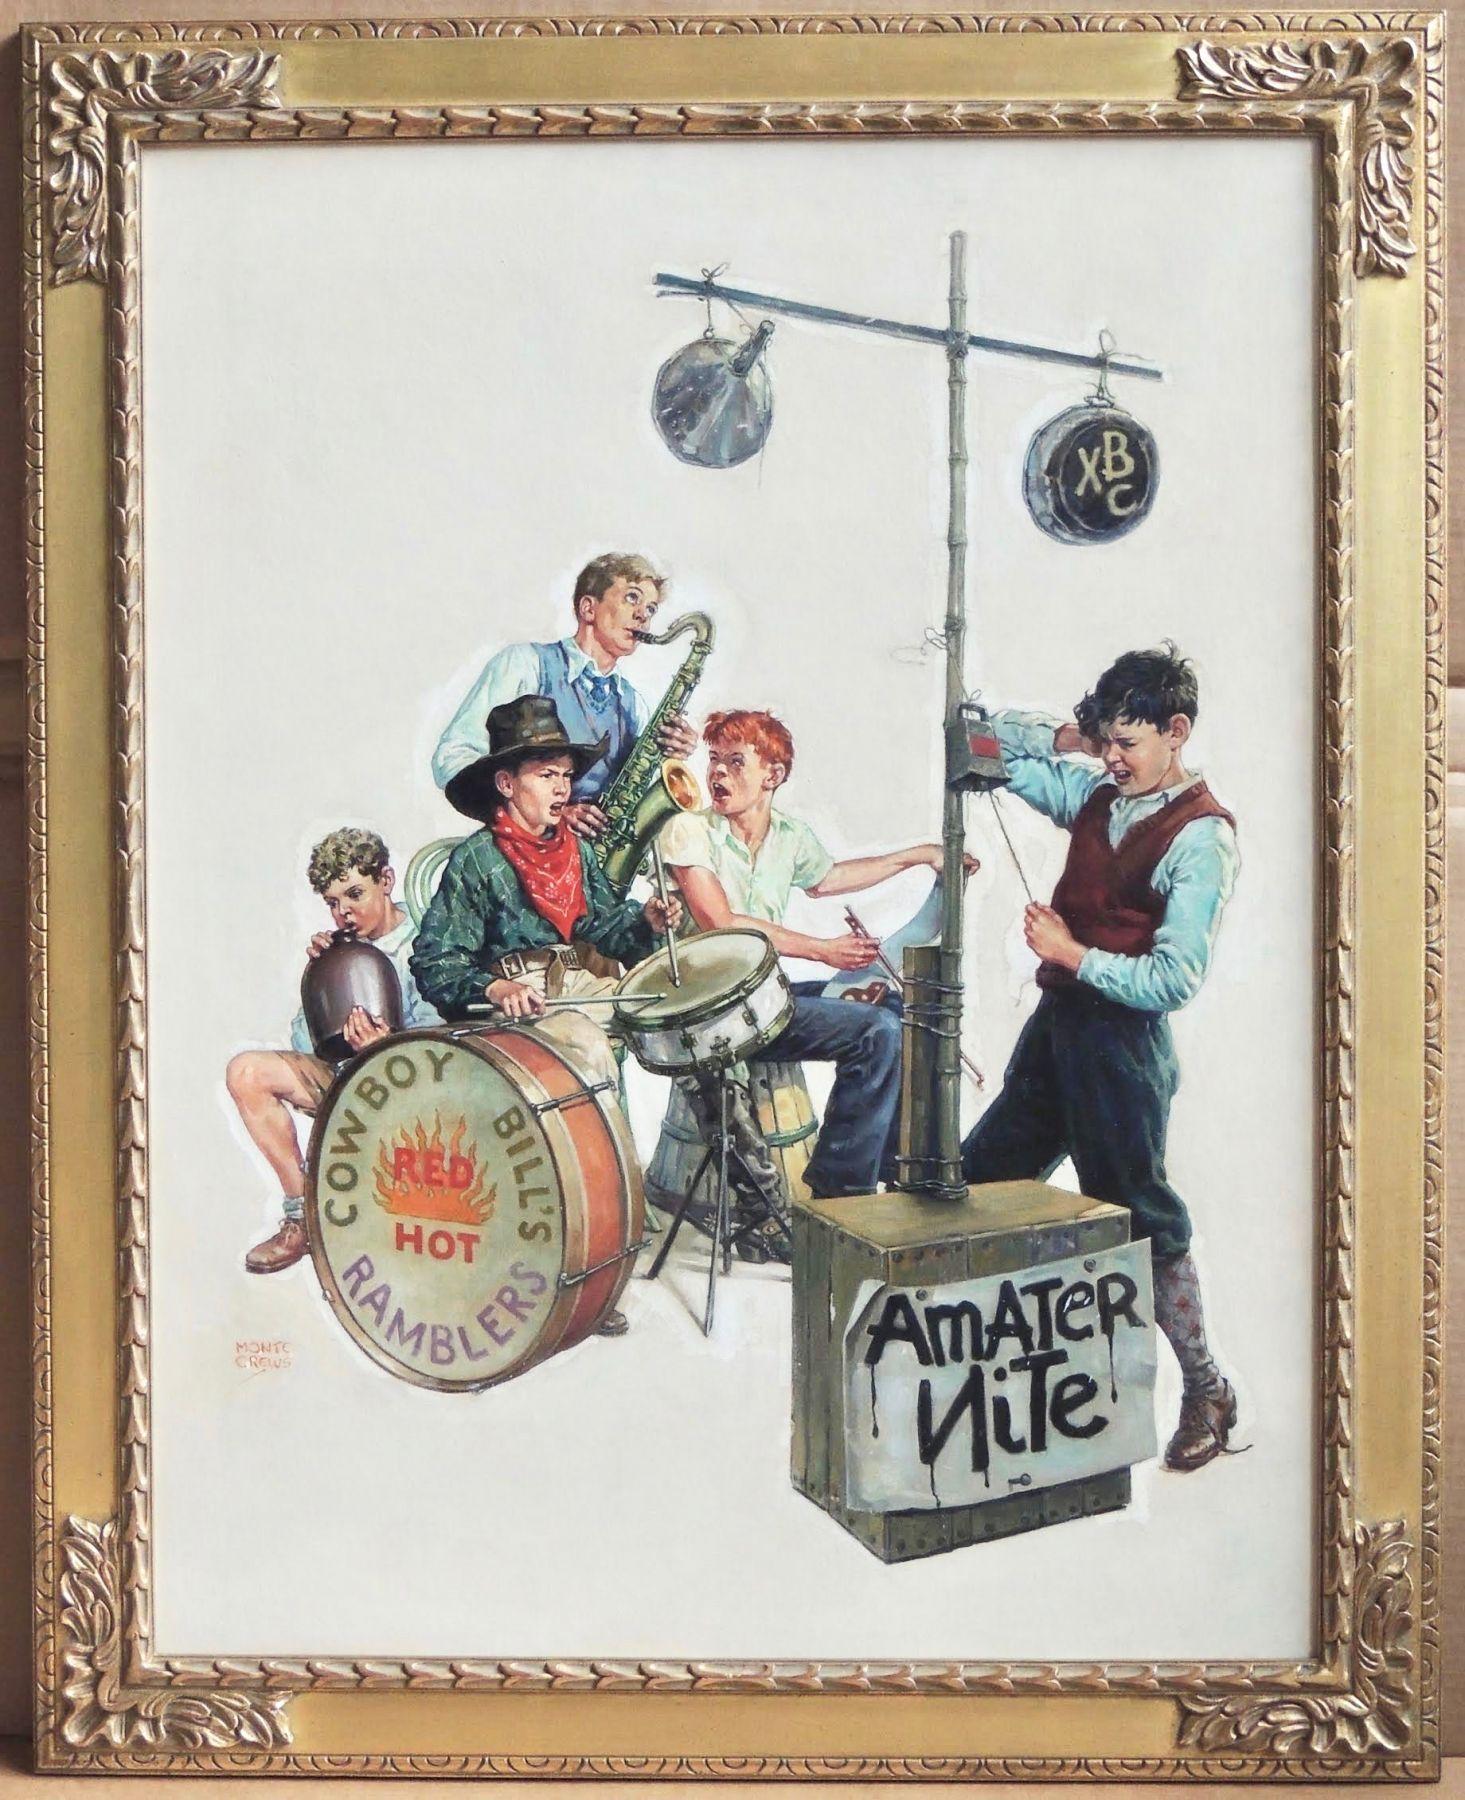 Amateur Nite - Cowboy Bill's Ramblers, The Saturday Evening Post cover, Jan - Painting by Monte Crews